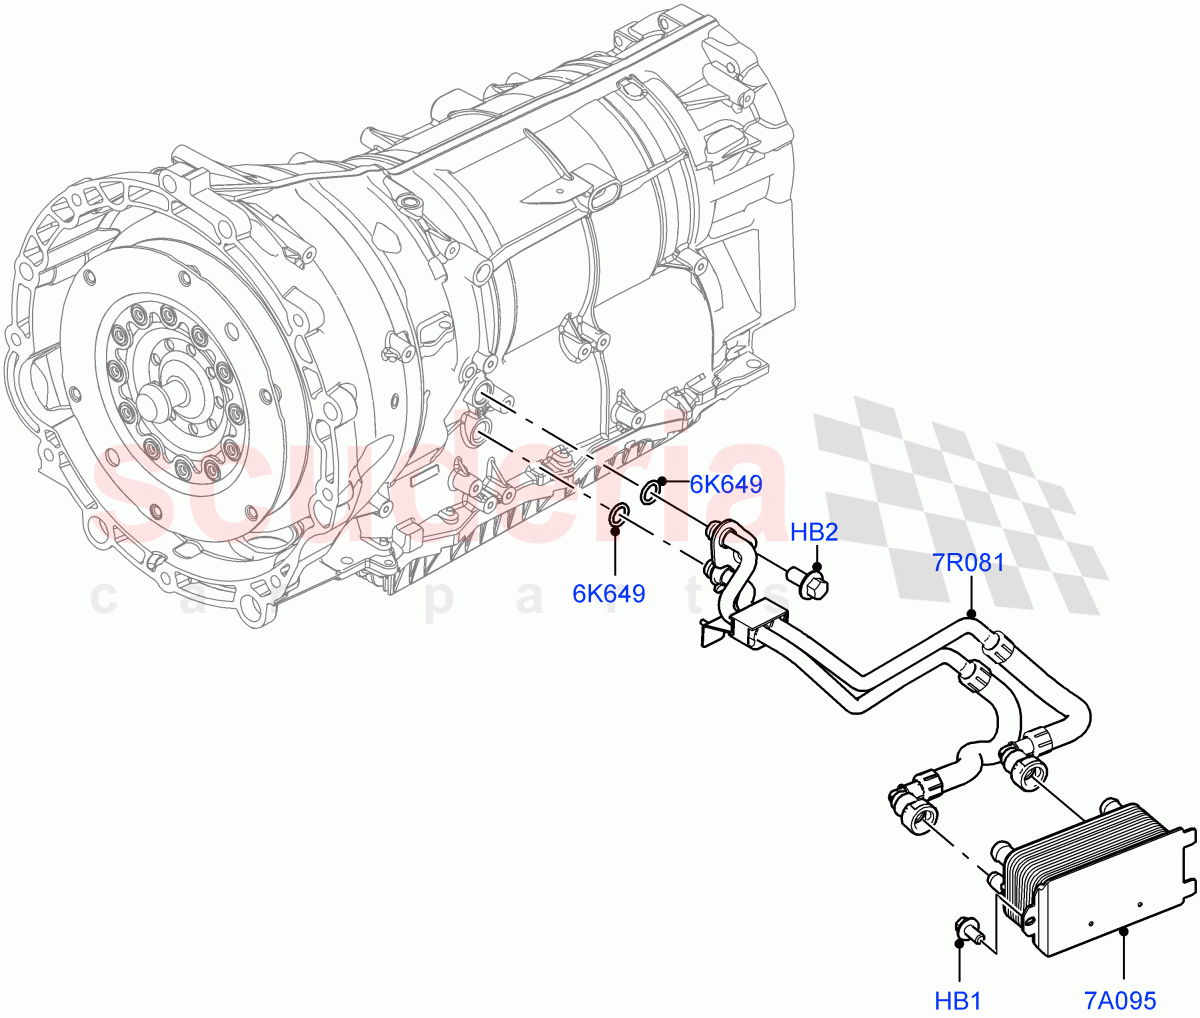 Transmission Cooling Systems(3.0L AJ20P6 Petrol High,8 Speed Auto Trans ZF 8HP76,3.0L AJ20D6 Diesel High)((V)FROMKA000001) of Land Rover Land Rover Range Rover (2012-2021) [3.0 DOHC GDI SC V6 Petrol]